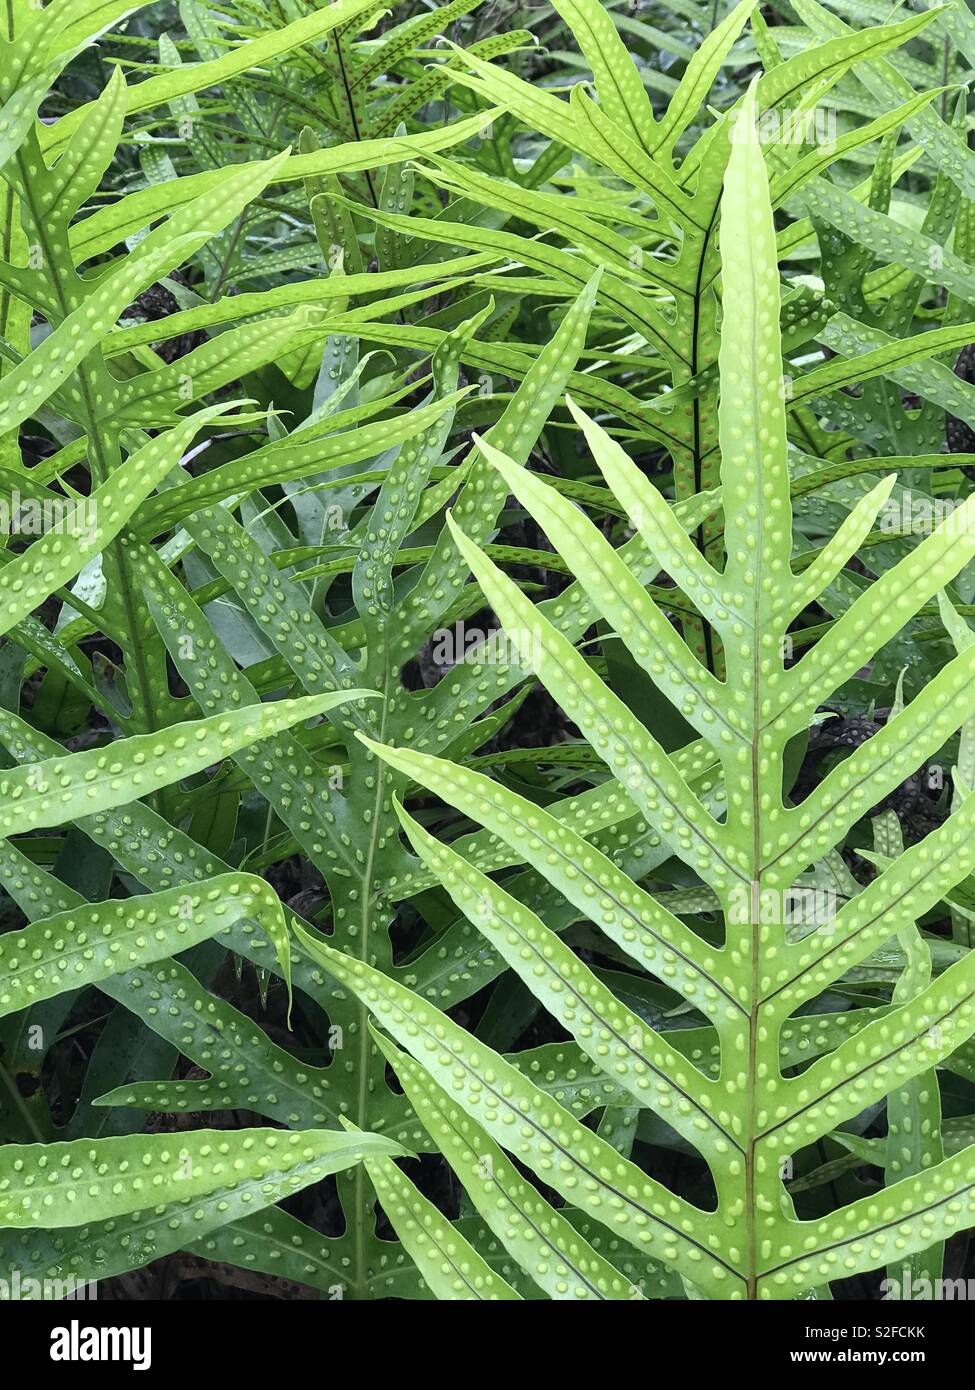 A thick collection of fern leaves is shown up close along a hiking path in a tropical forest during the day. Stock Photo